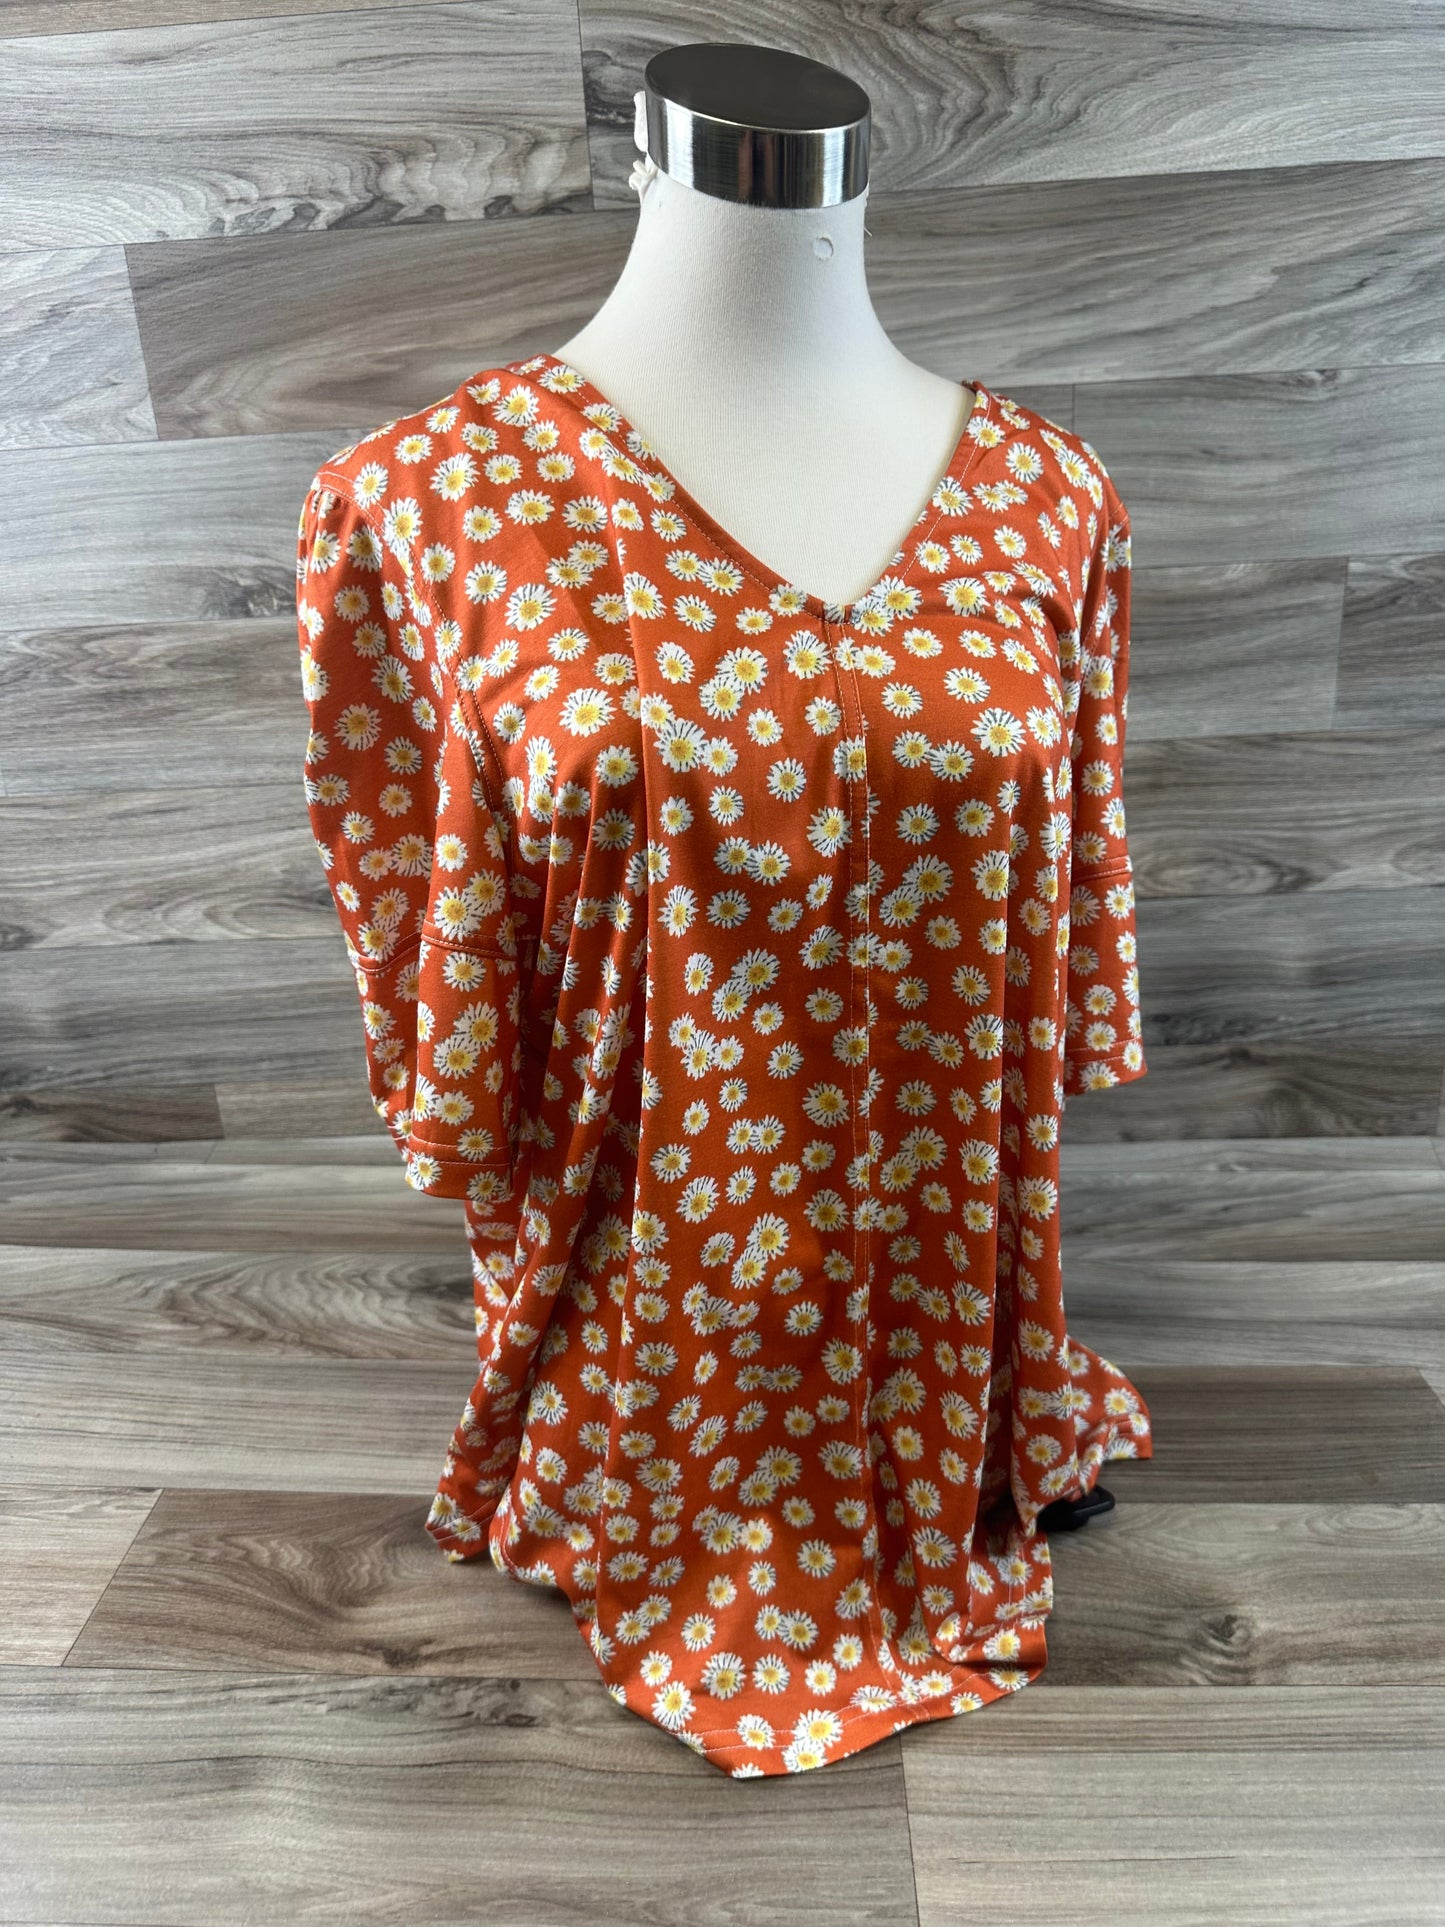 Orange & Yellow Top Short Sleeve Clothes Mentor, Size 1x